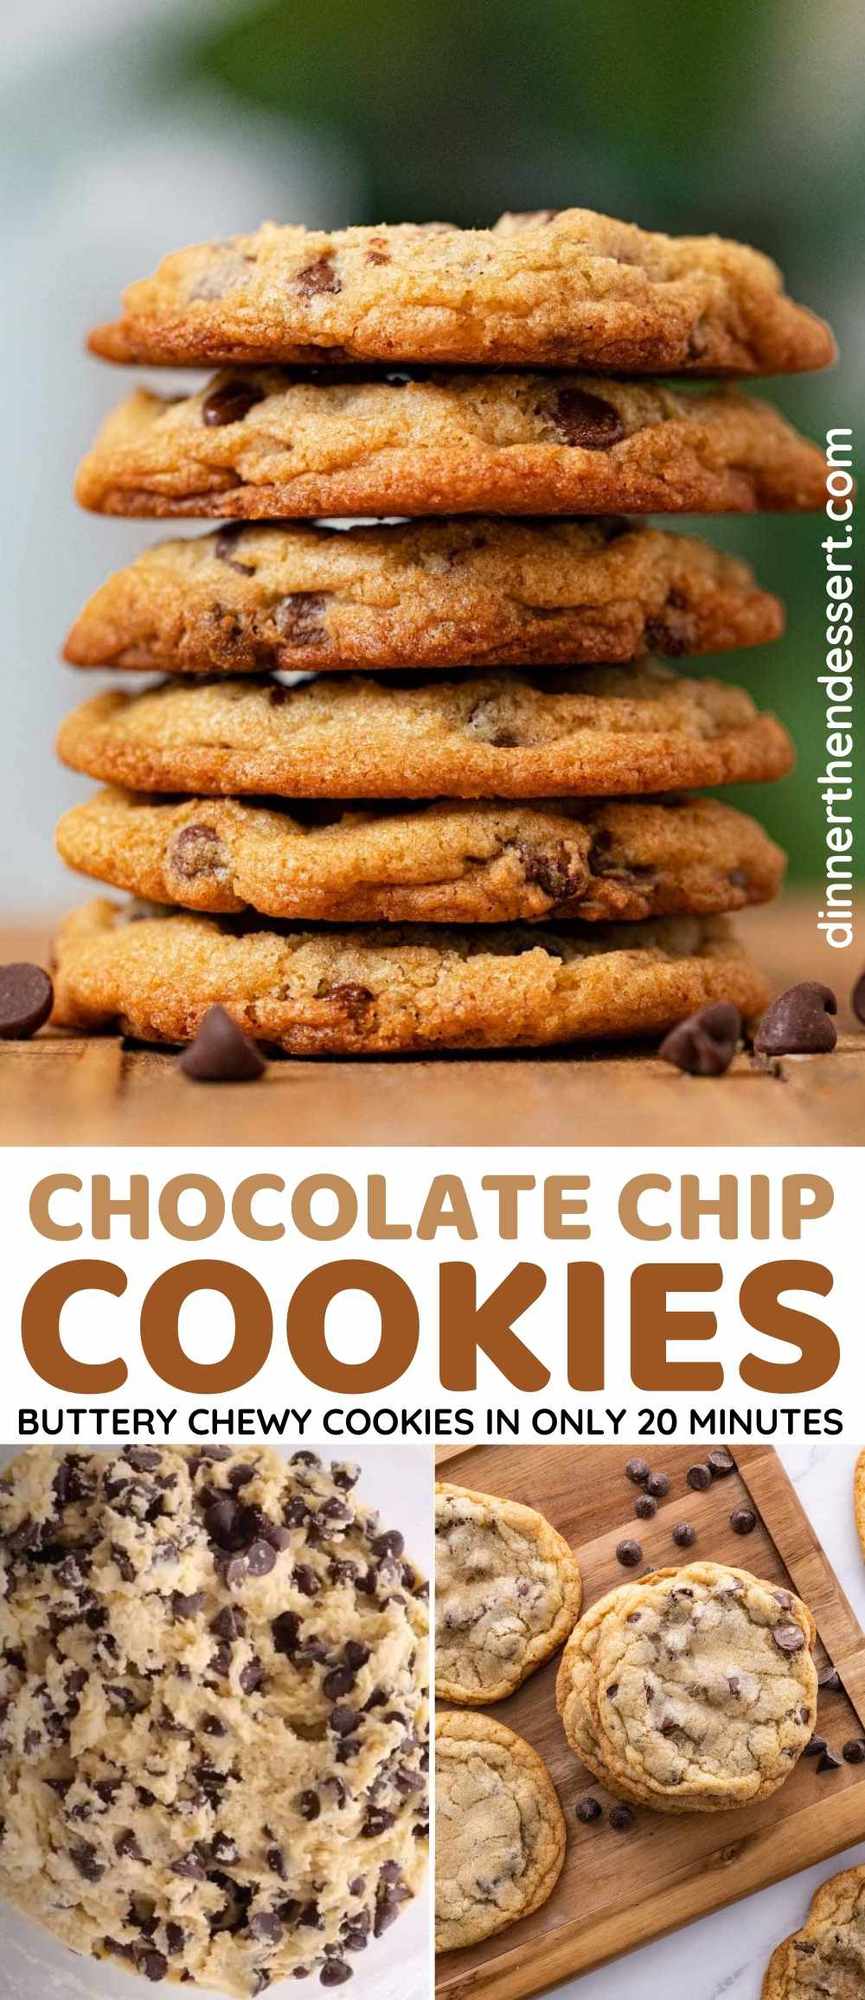 Chocolate Chip Cookies Collage